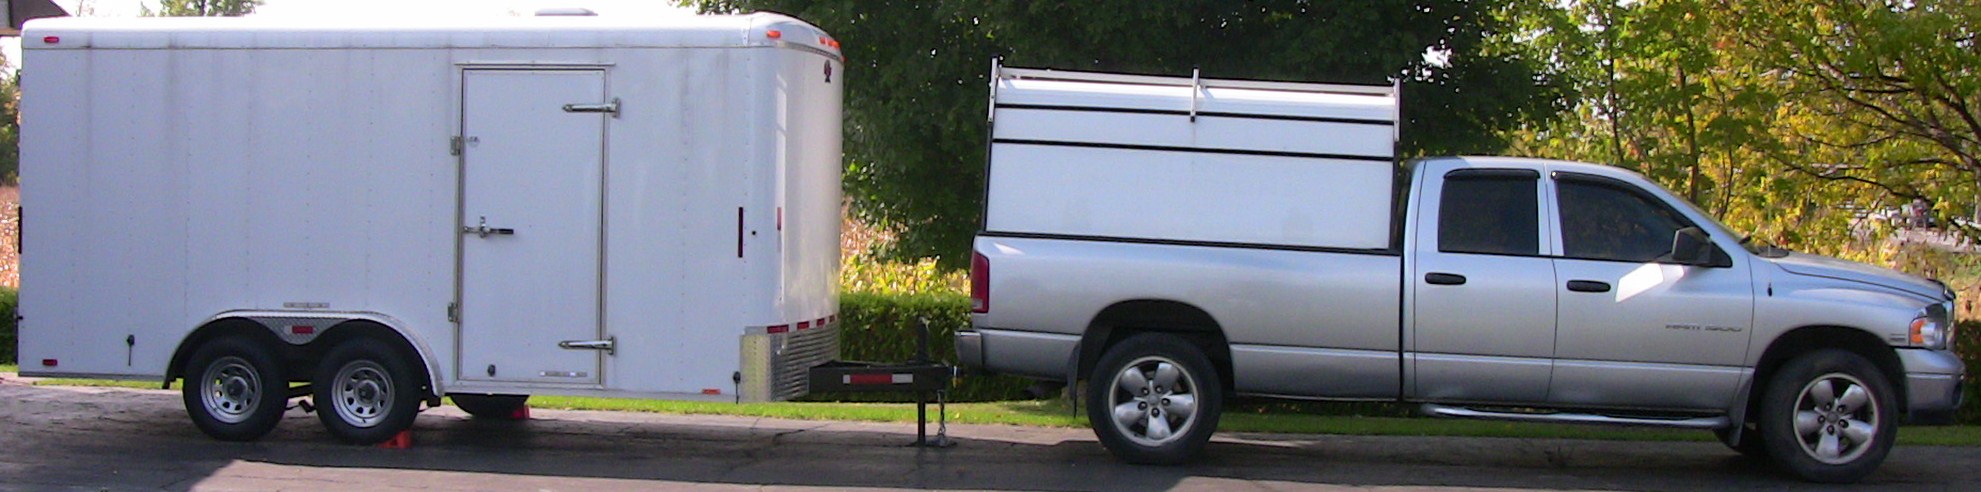 ottawa moving truck and trailer